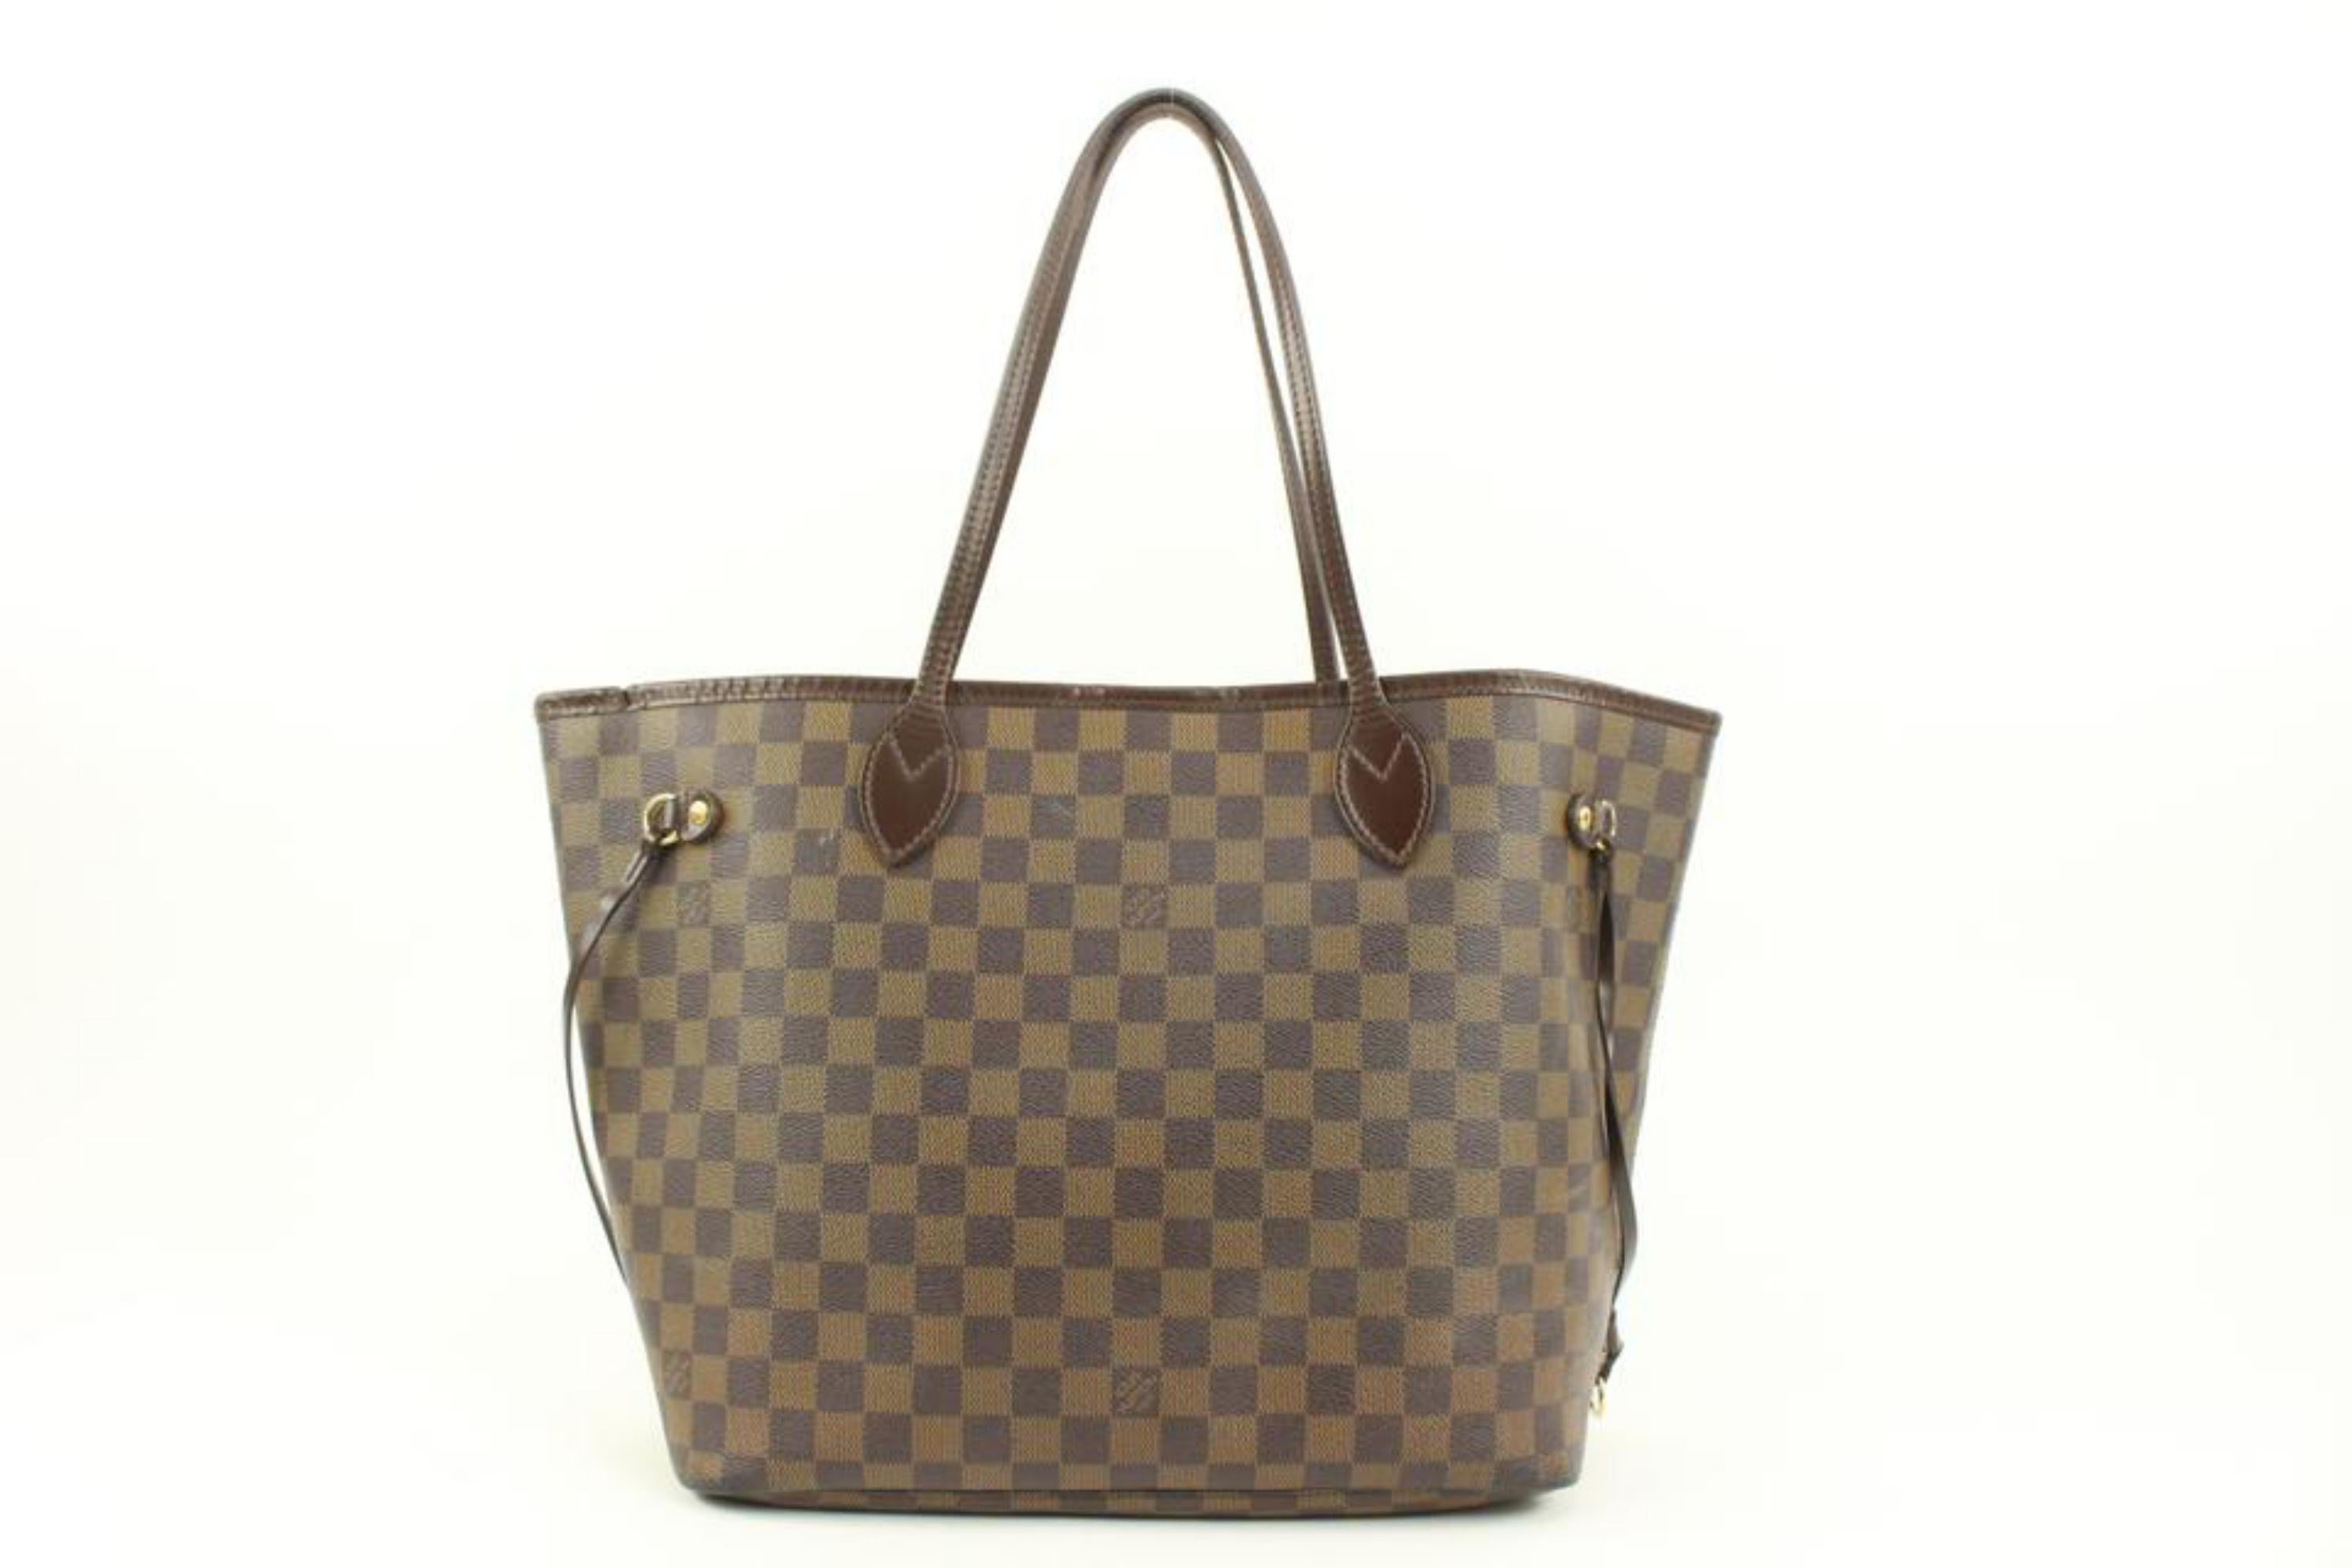 Louis Vuitton Damier Ebene Neverfull MM Tote bag s29lv27
Date Code/Serial Number: SP2038
Made In: France
Measurements: Length:  18